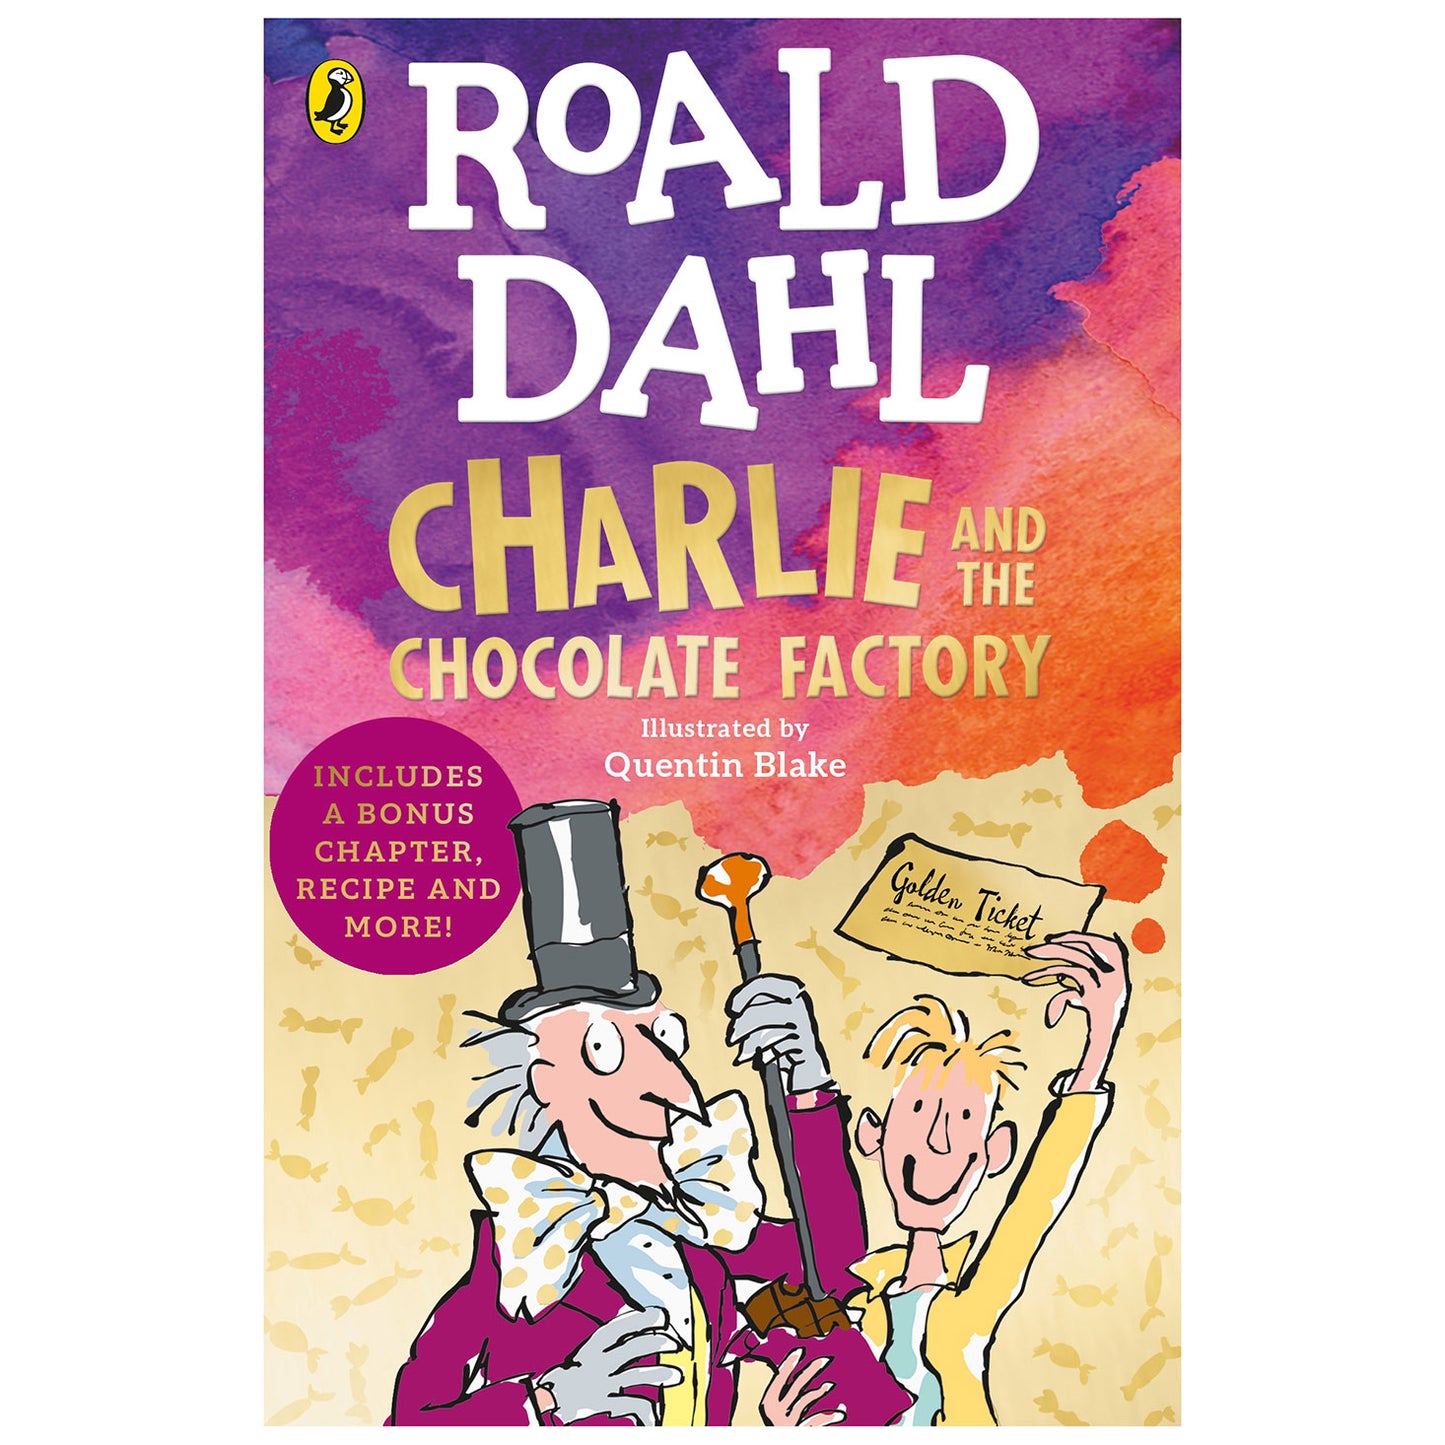 Charlie and the Chocolate Factory by Roald Dahl with illustrations by Quentin Blake